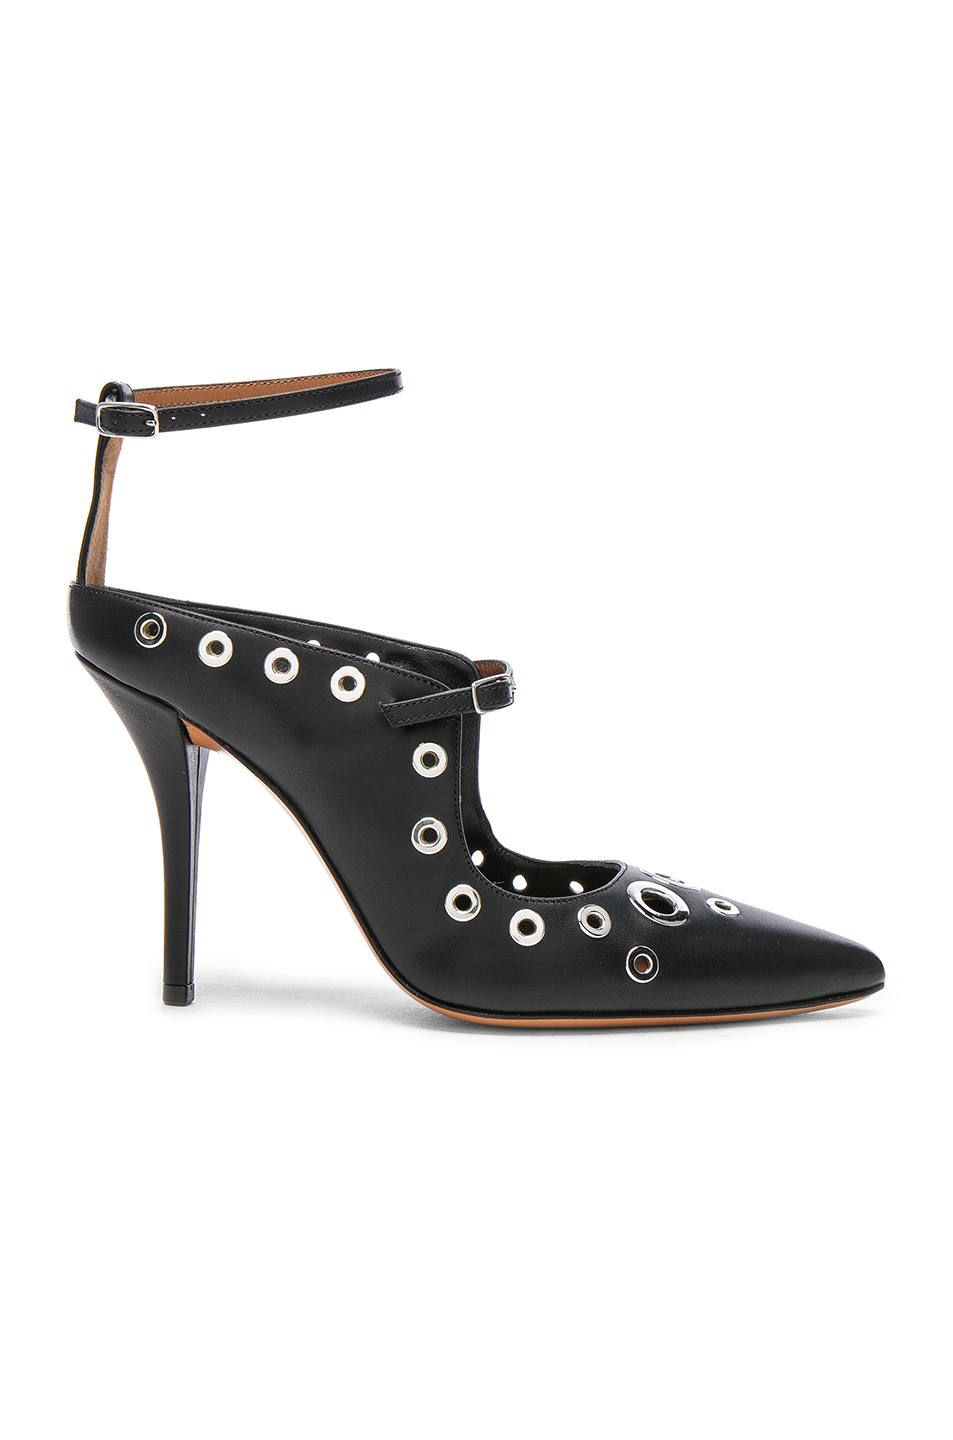 GIVENCHY GROMMETED LEATHER POINT-TOE PUMPS, BLACK | ModeSens